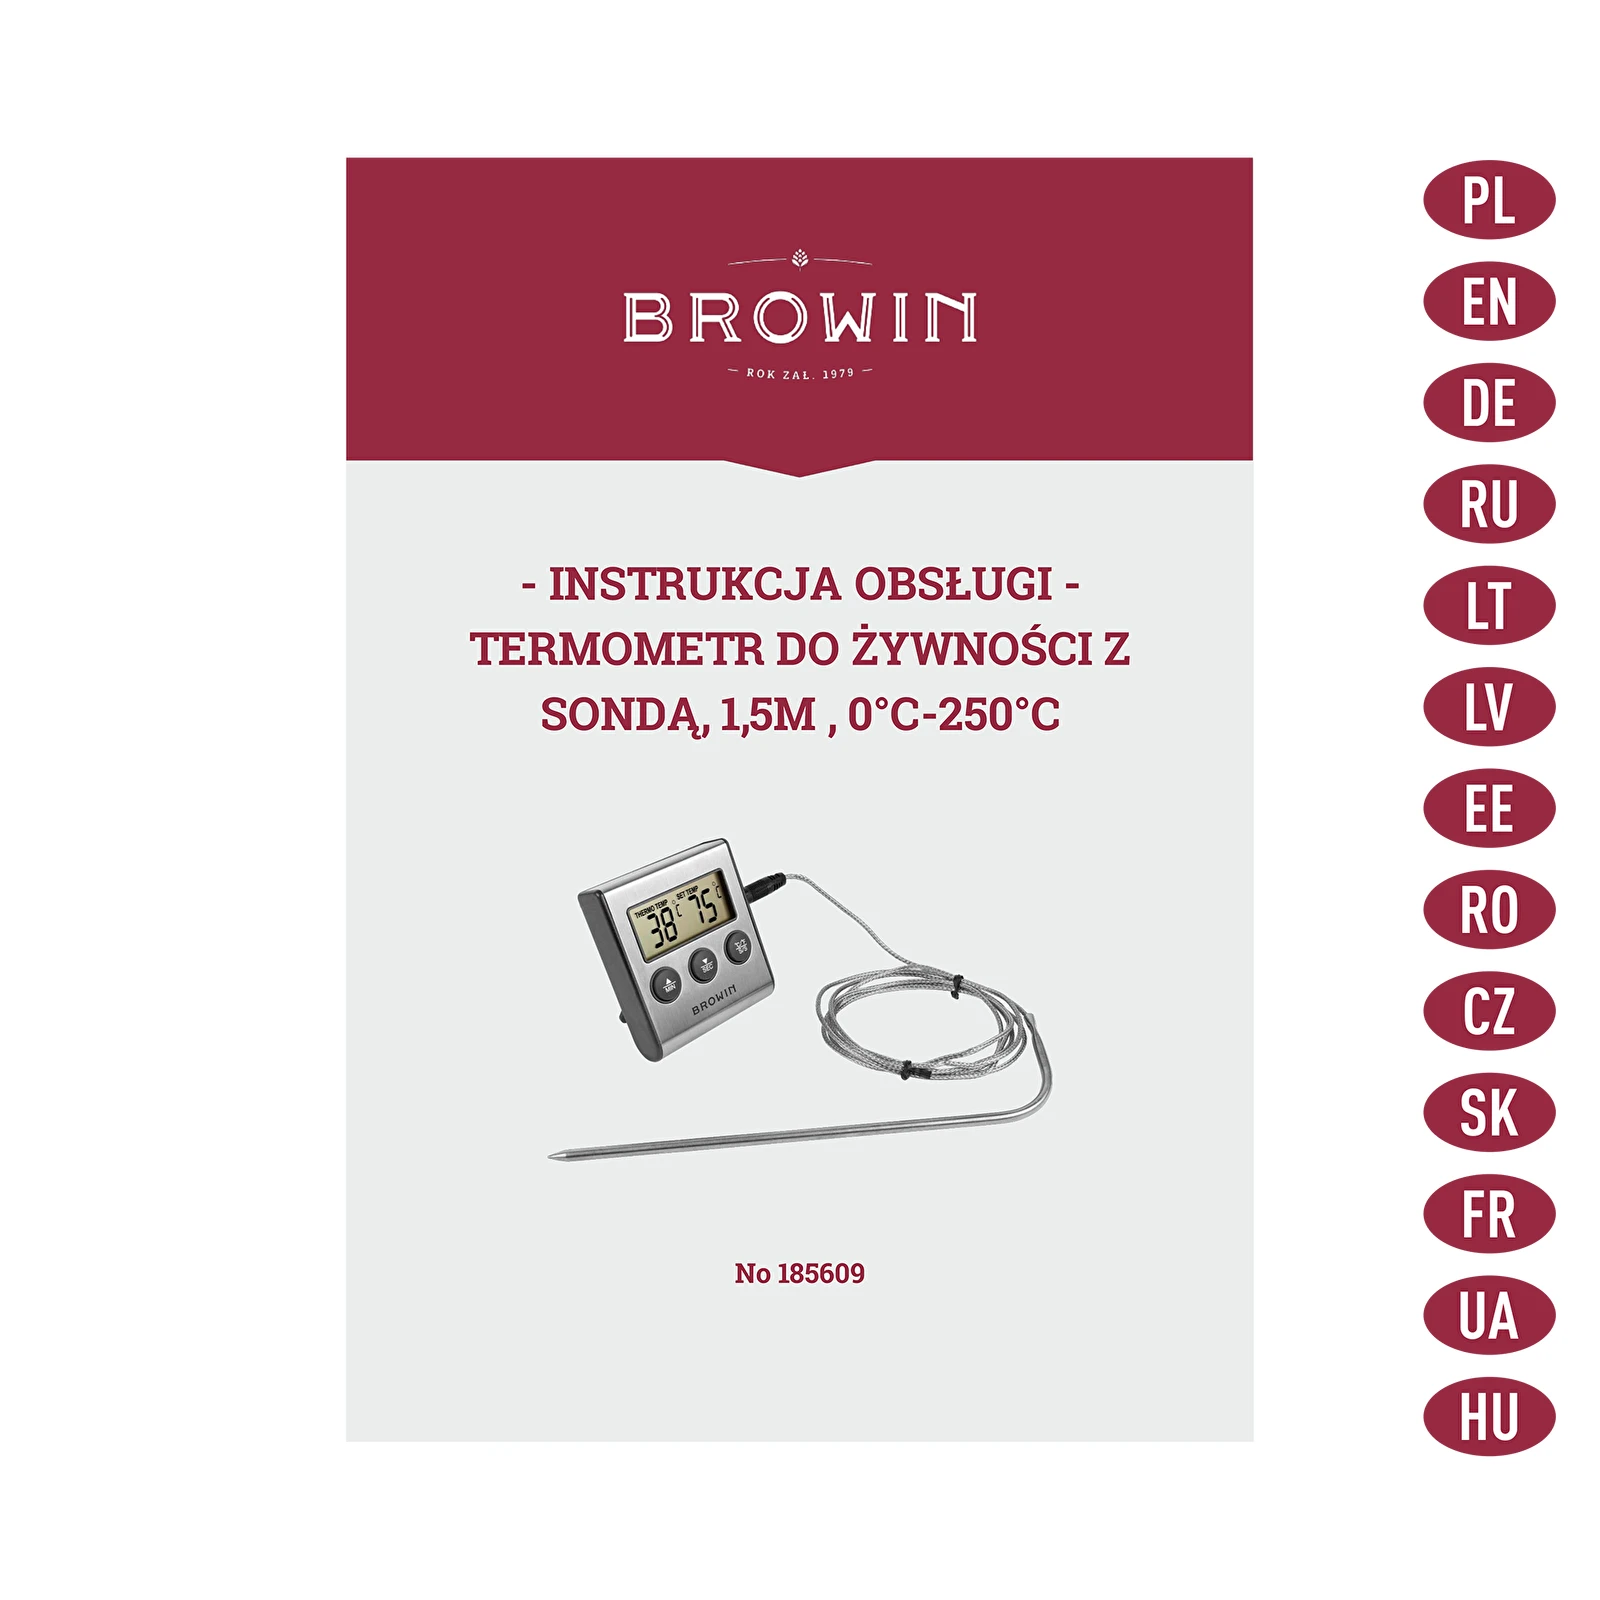 https://browin.com/static/images/1600/food-thermometer-with-probe-0-c-250-c-1-5-m-185609_ins.webp